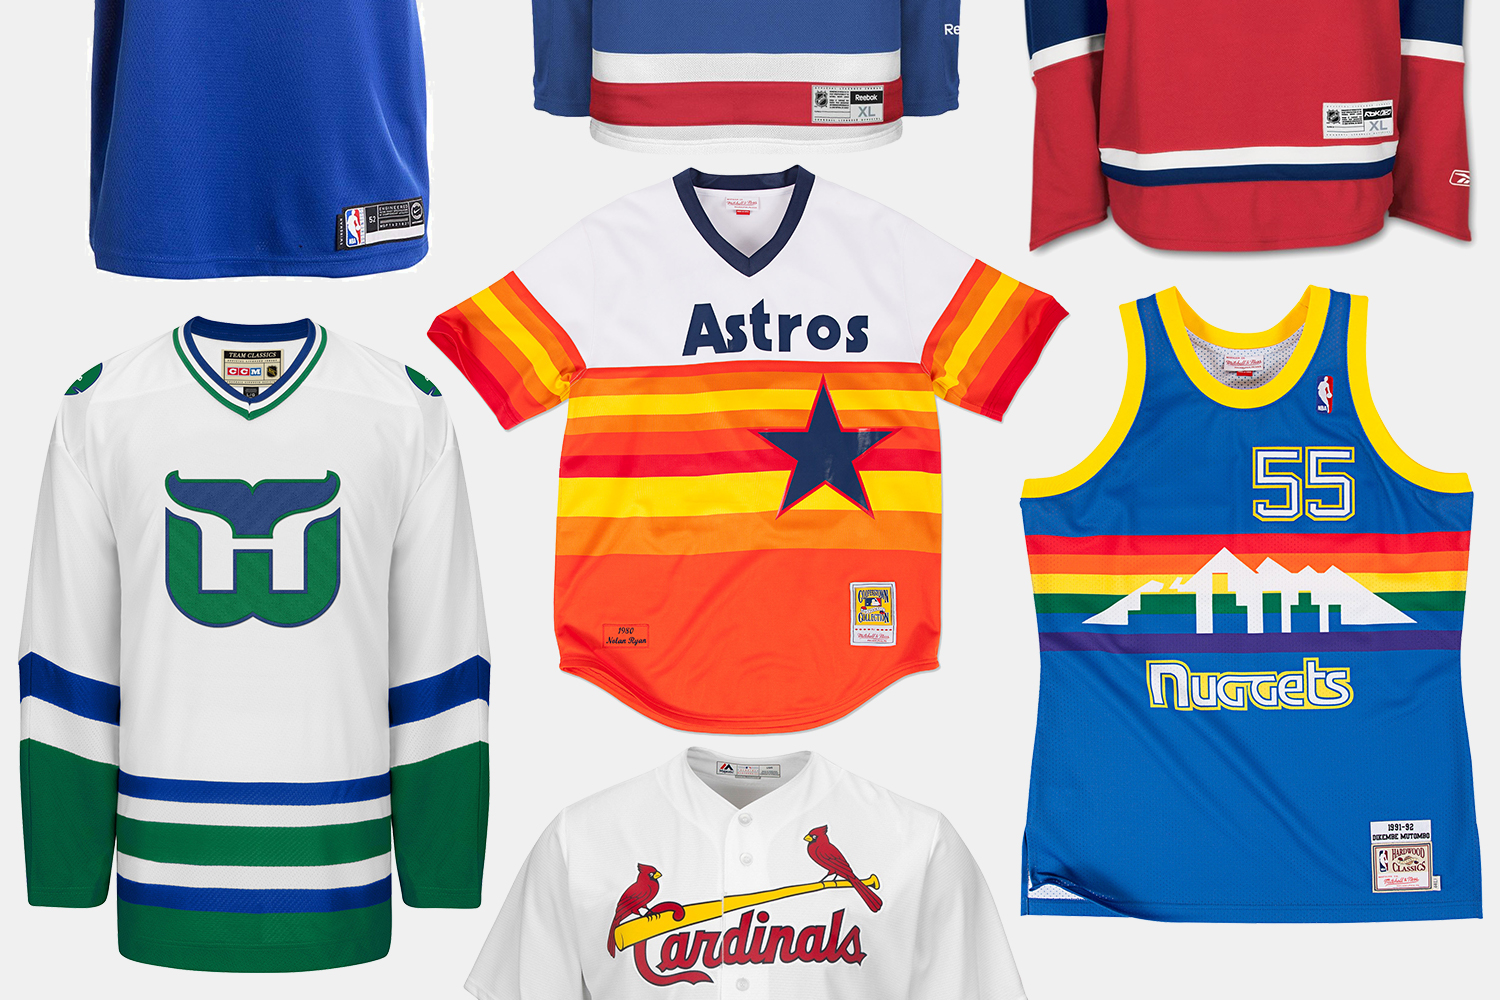 where can i buy nfl jerseys online